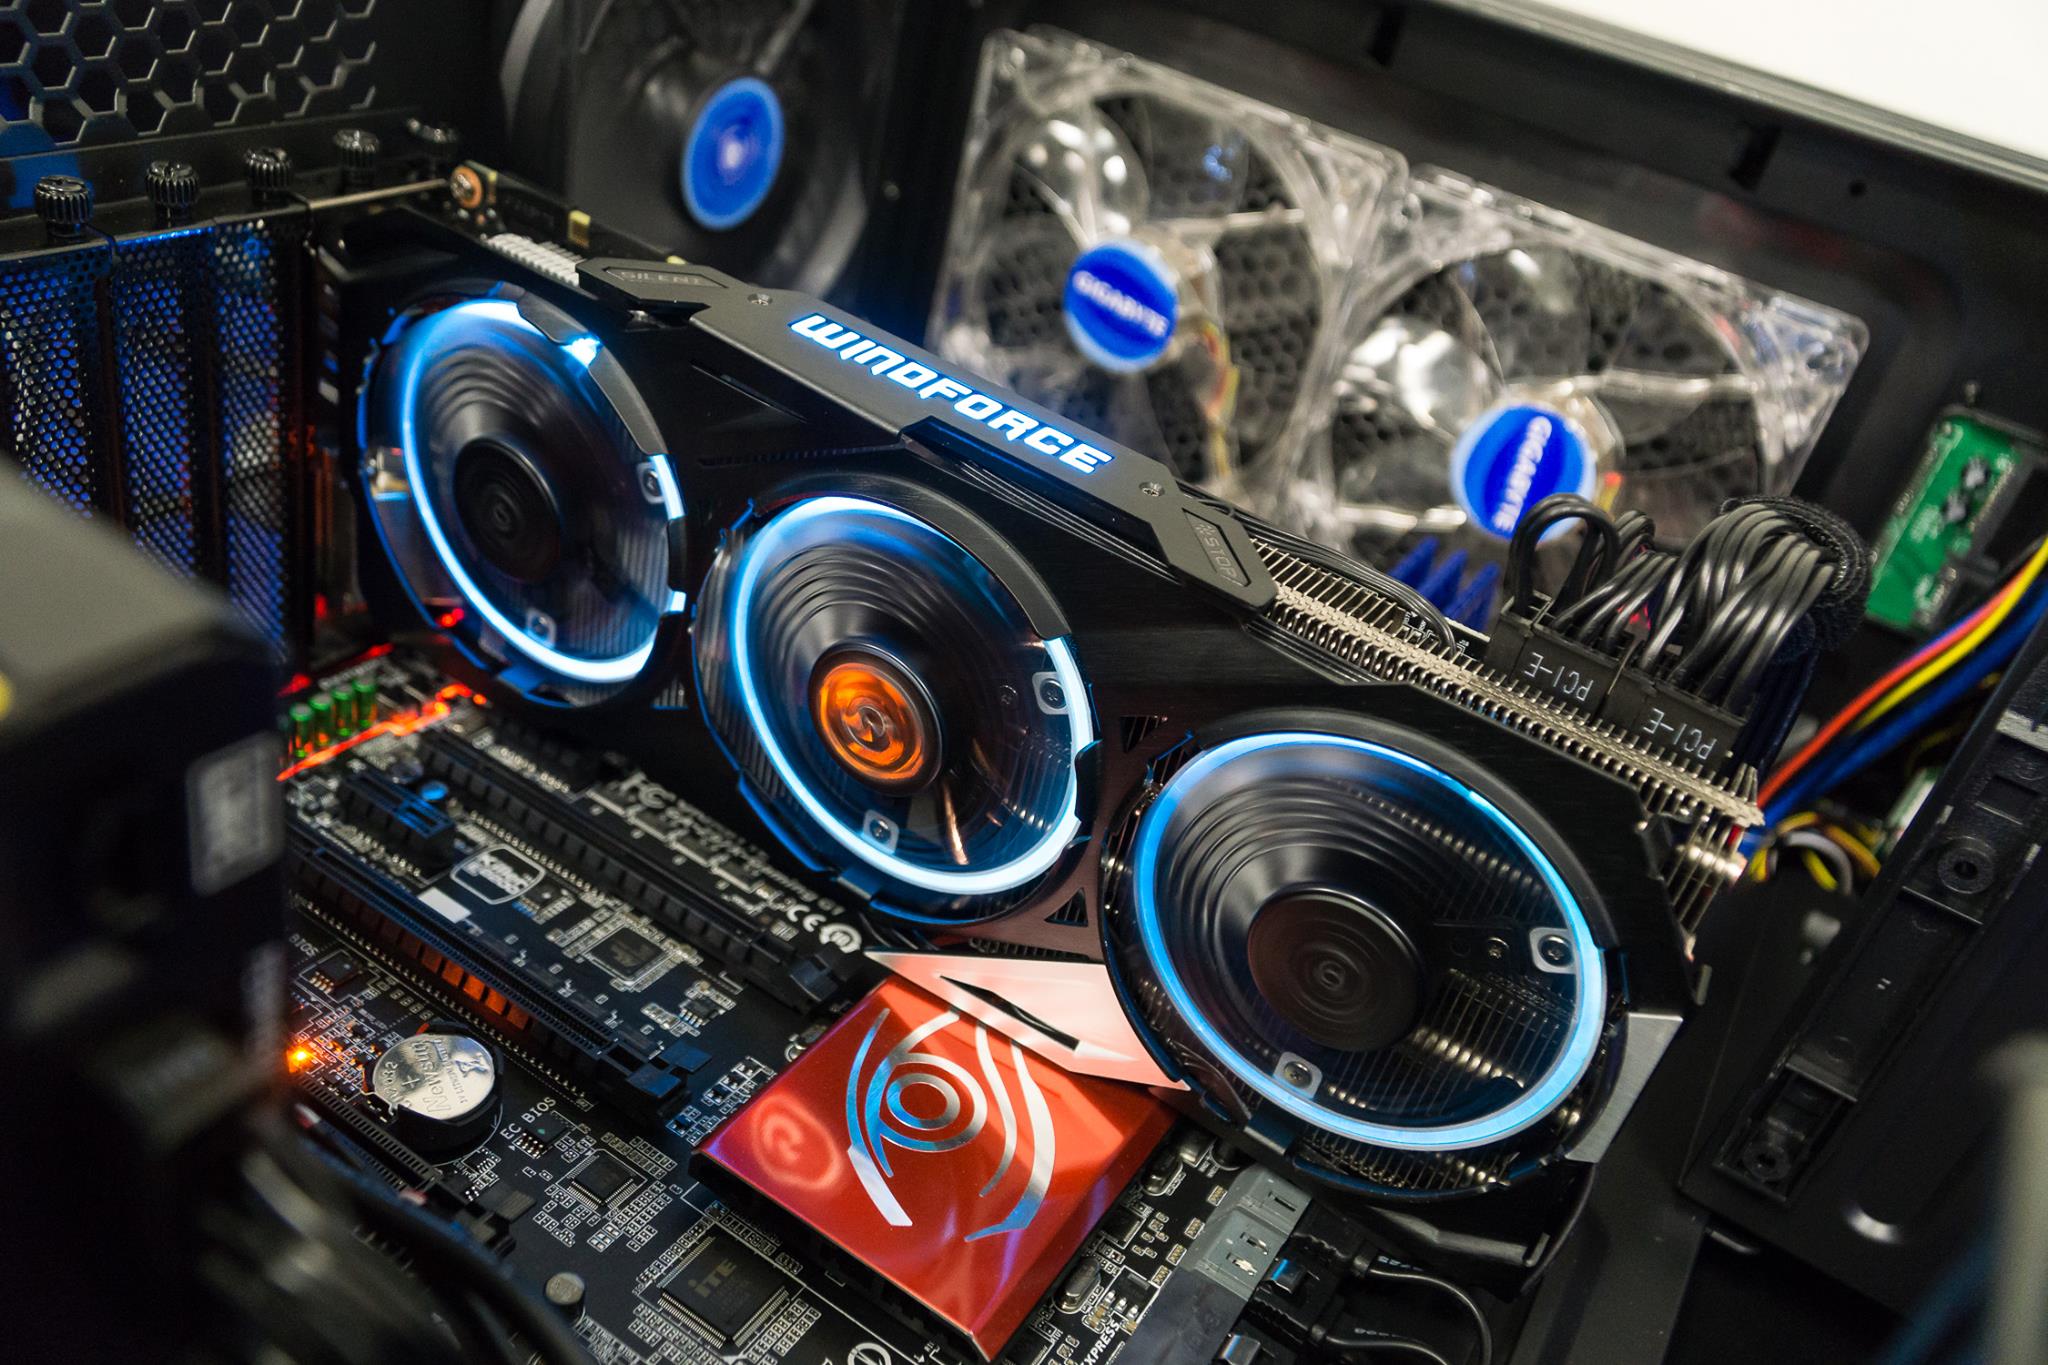 GIGABYTE Updates Entire GTX 900 Series Lineup, Introduces New Xtreme Gaming Series